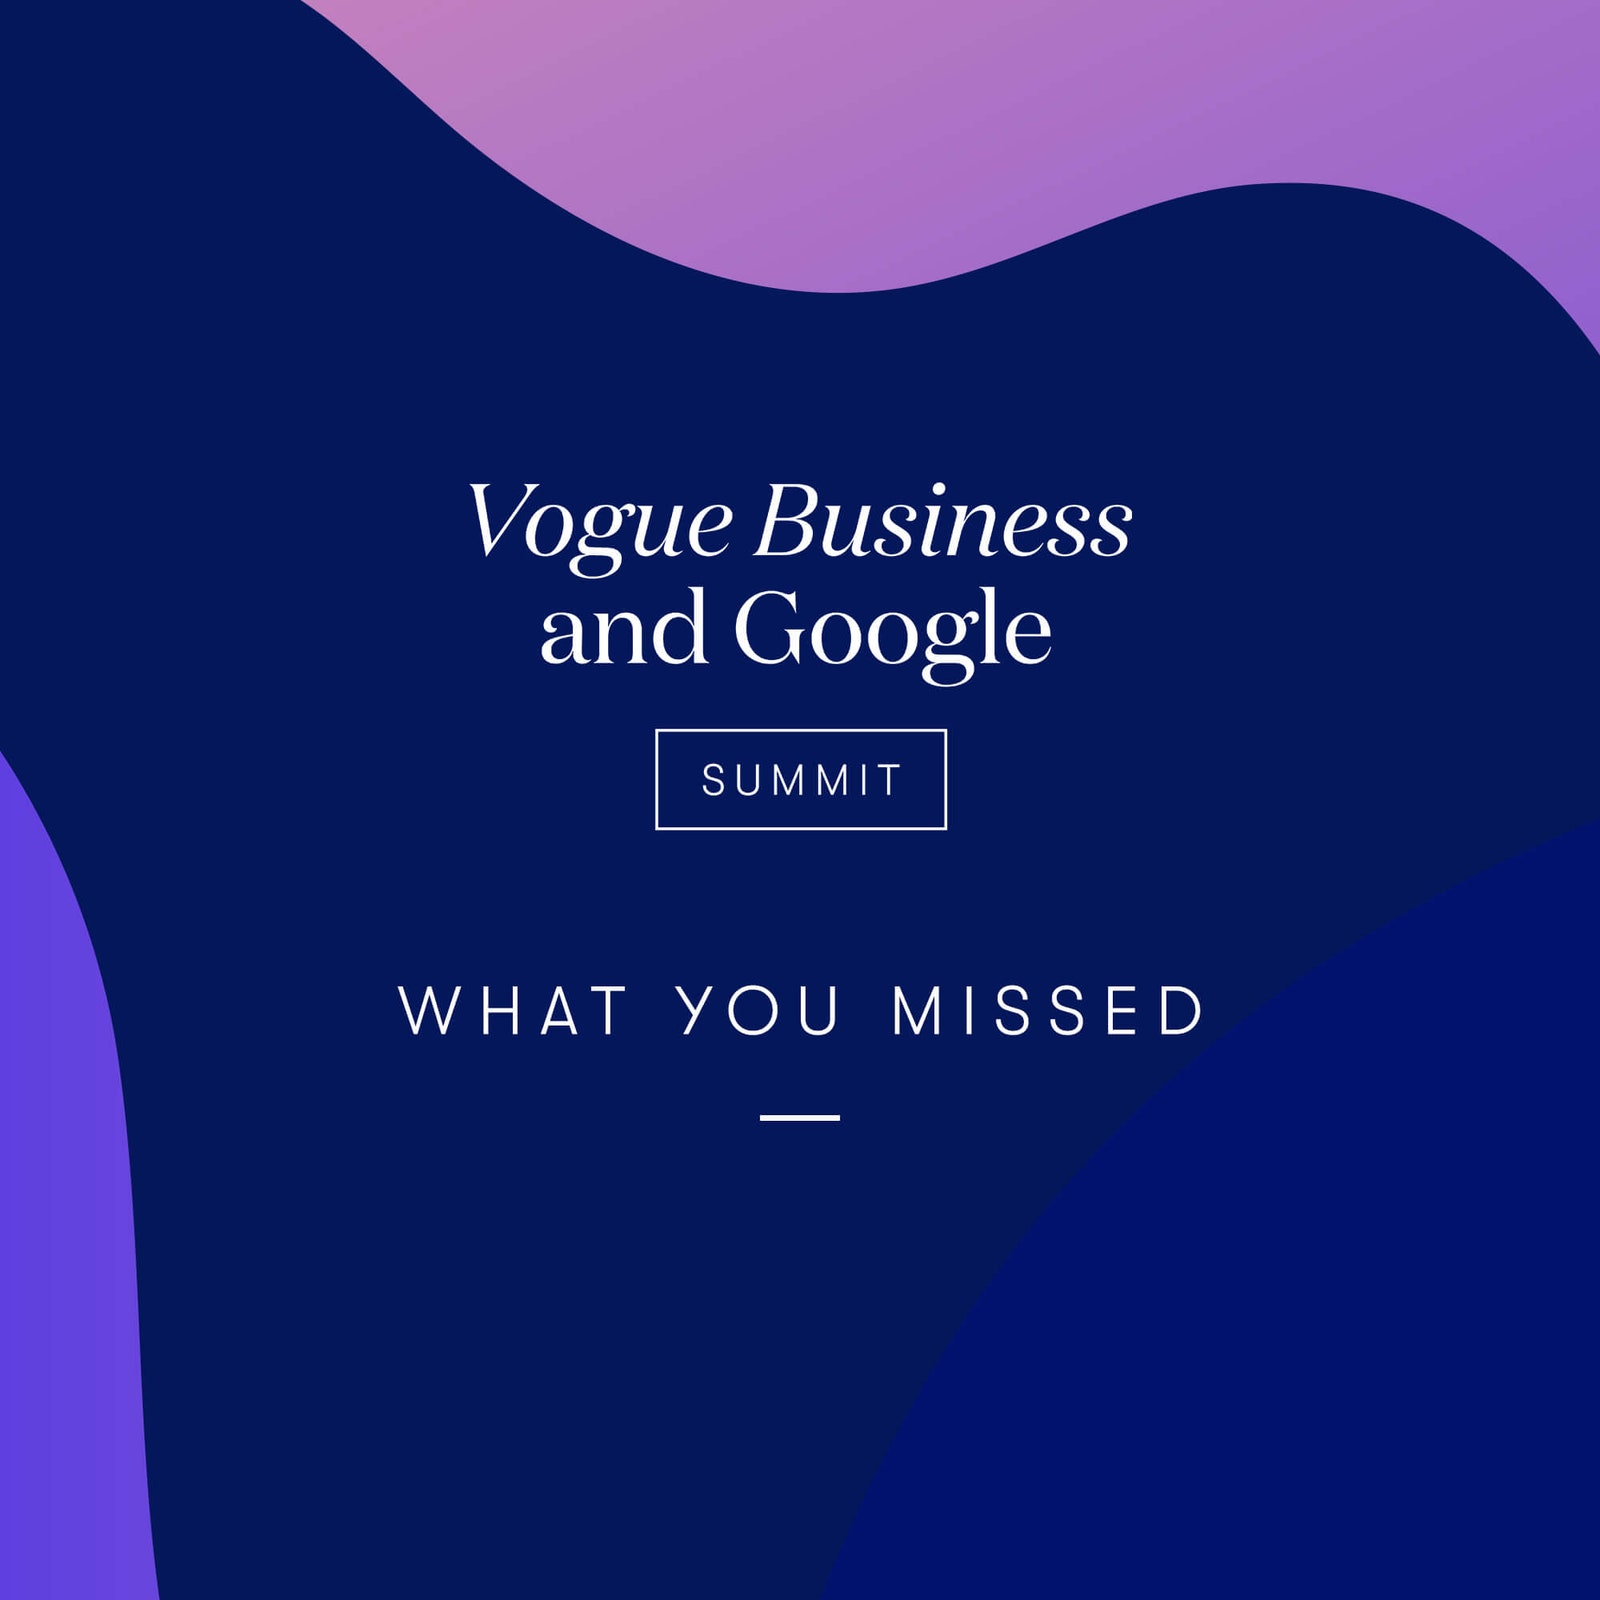 What you missed at the 2021 Vogue Business and Google Summit